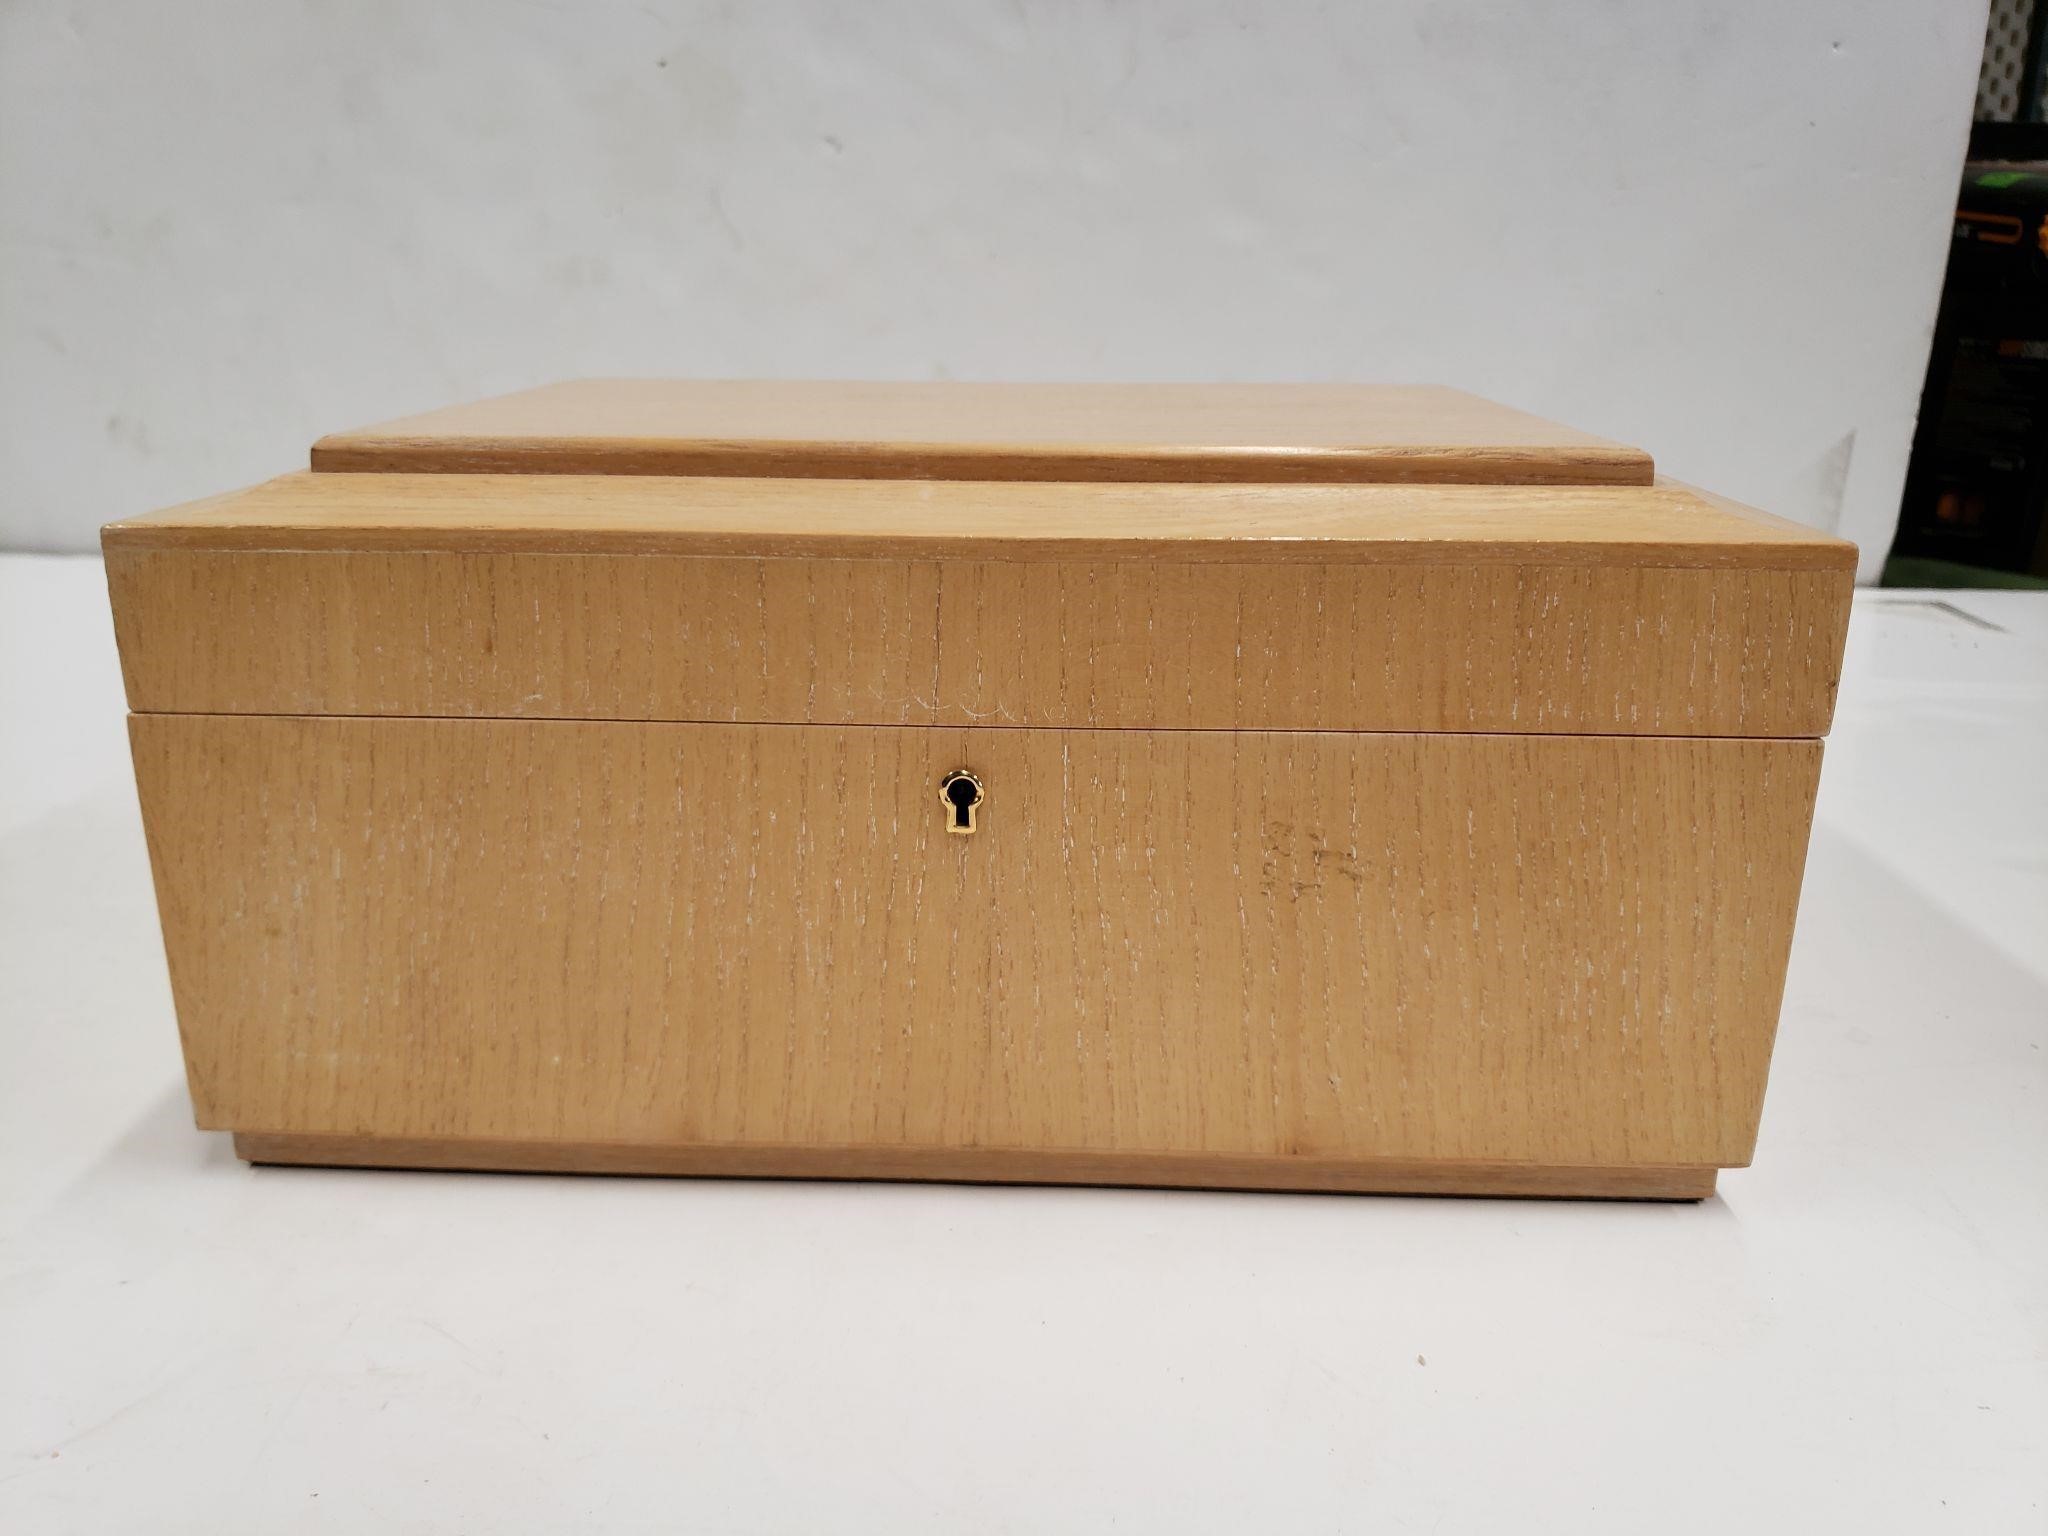 Wooden Jewelry Box With Removable Insert